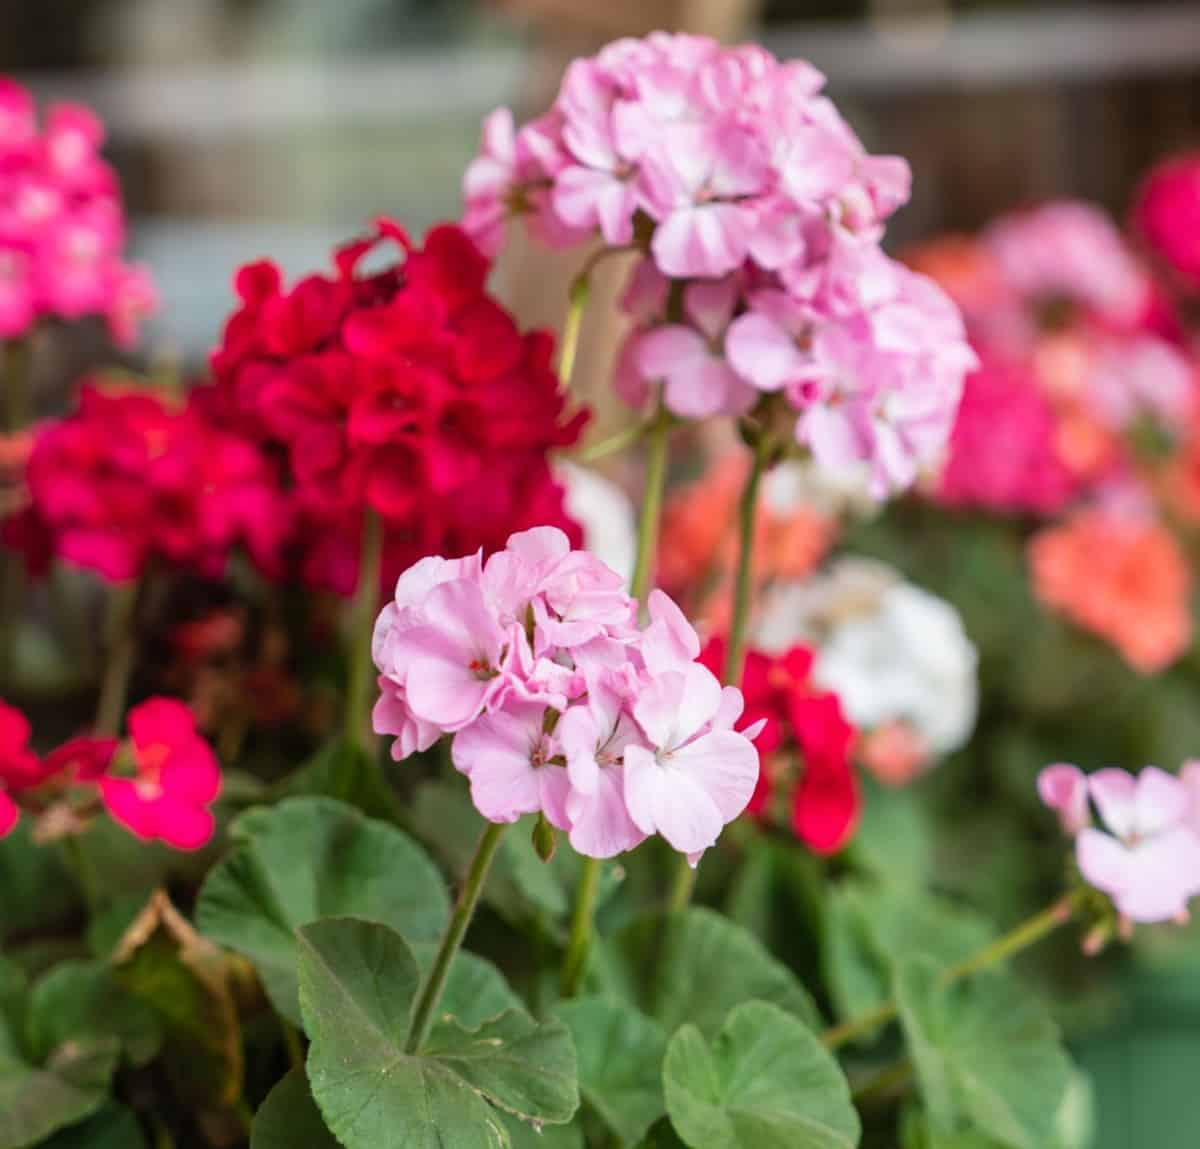 Geraniums are an annual with a long blooming season.